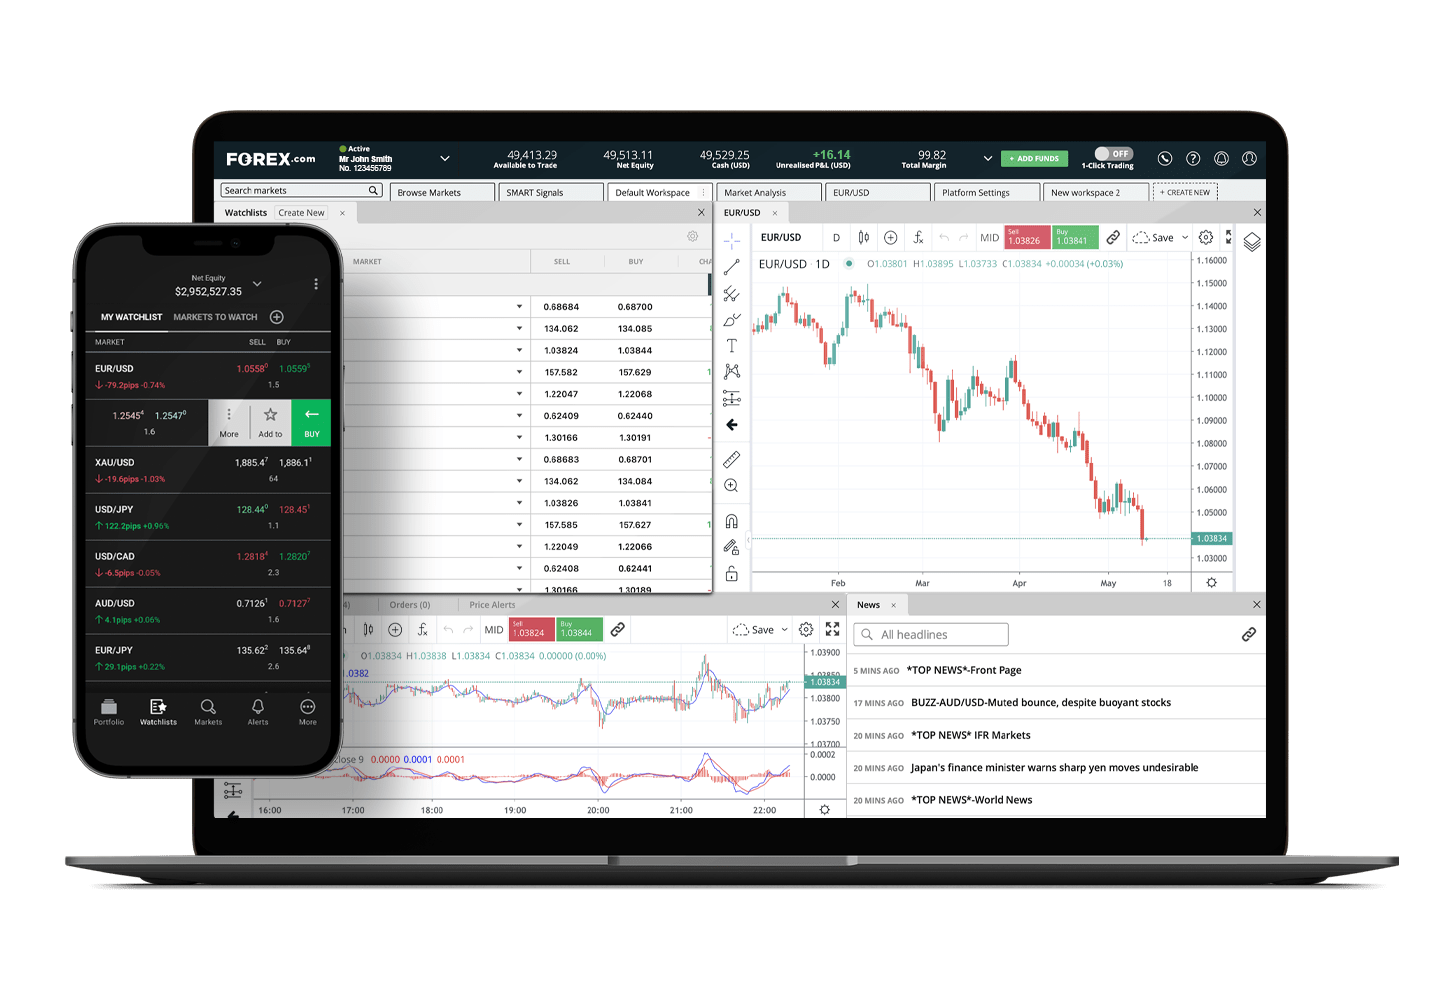 FXPRIMUS Broker Review - Forex Trading in Philippines